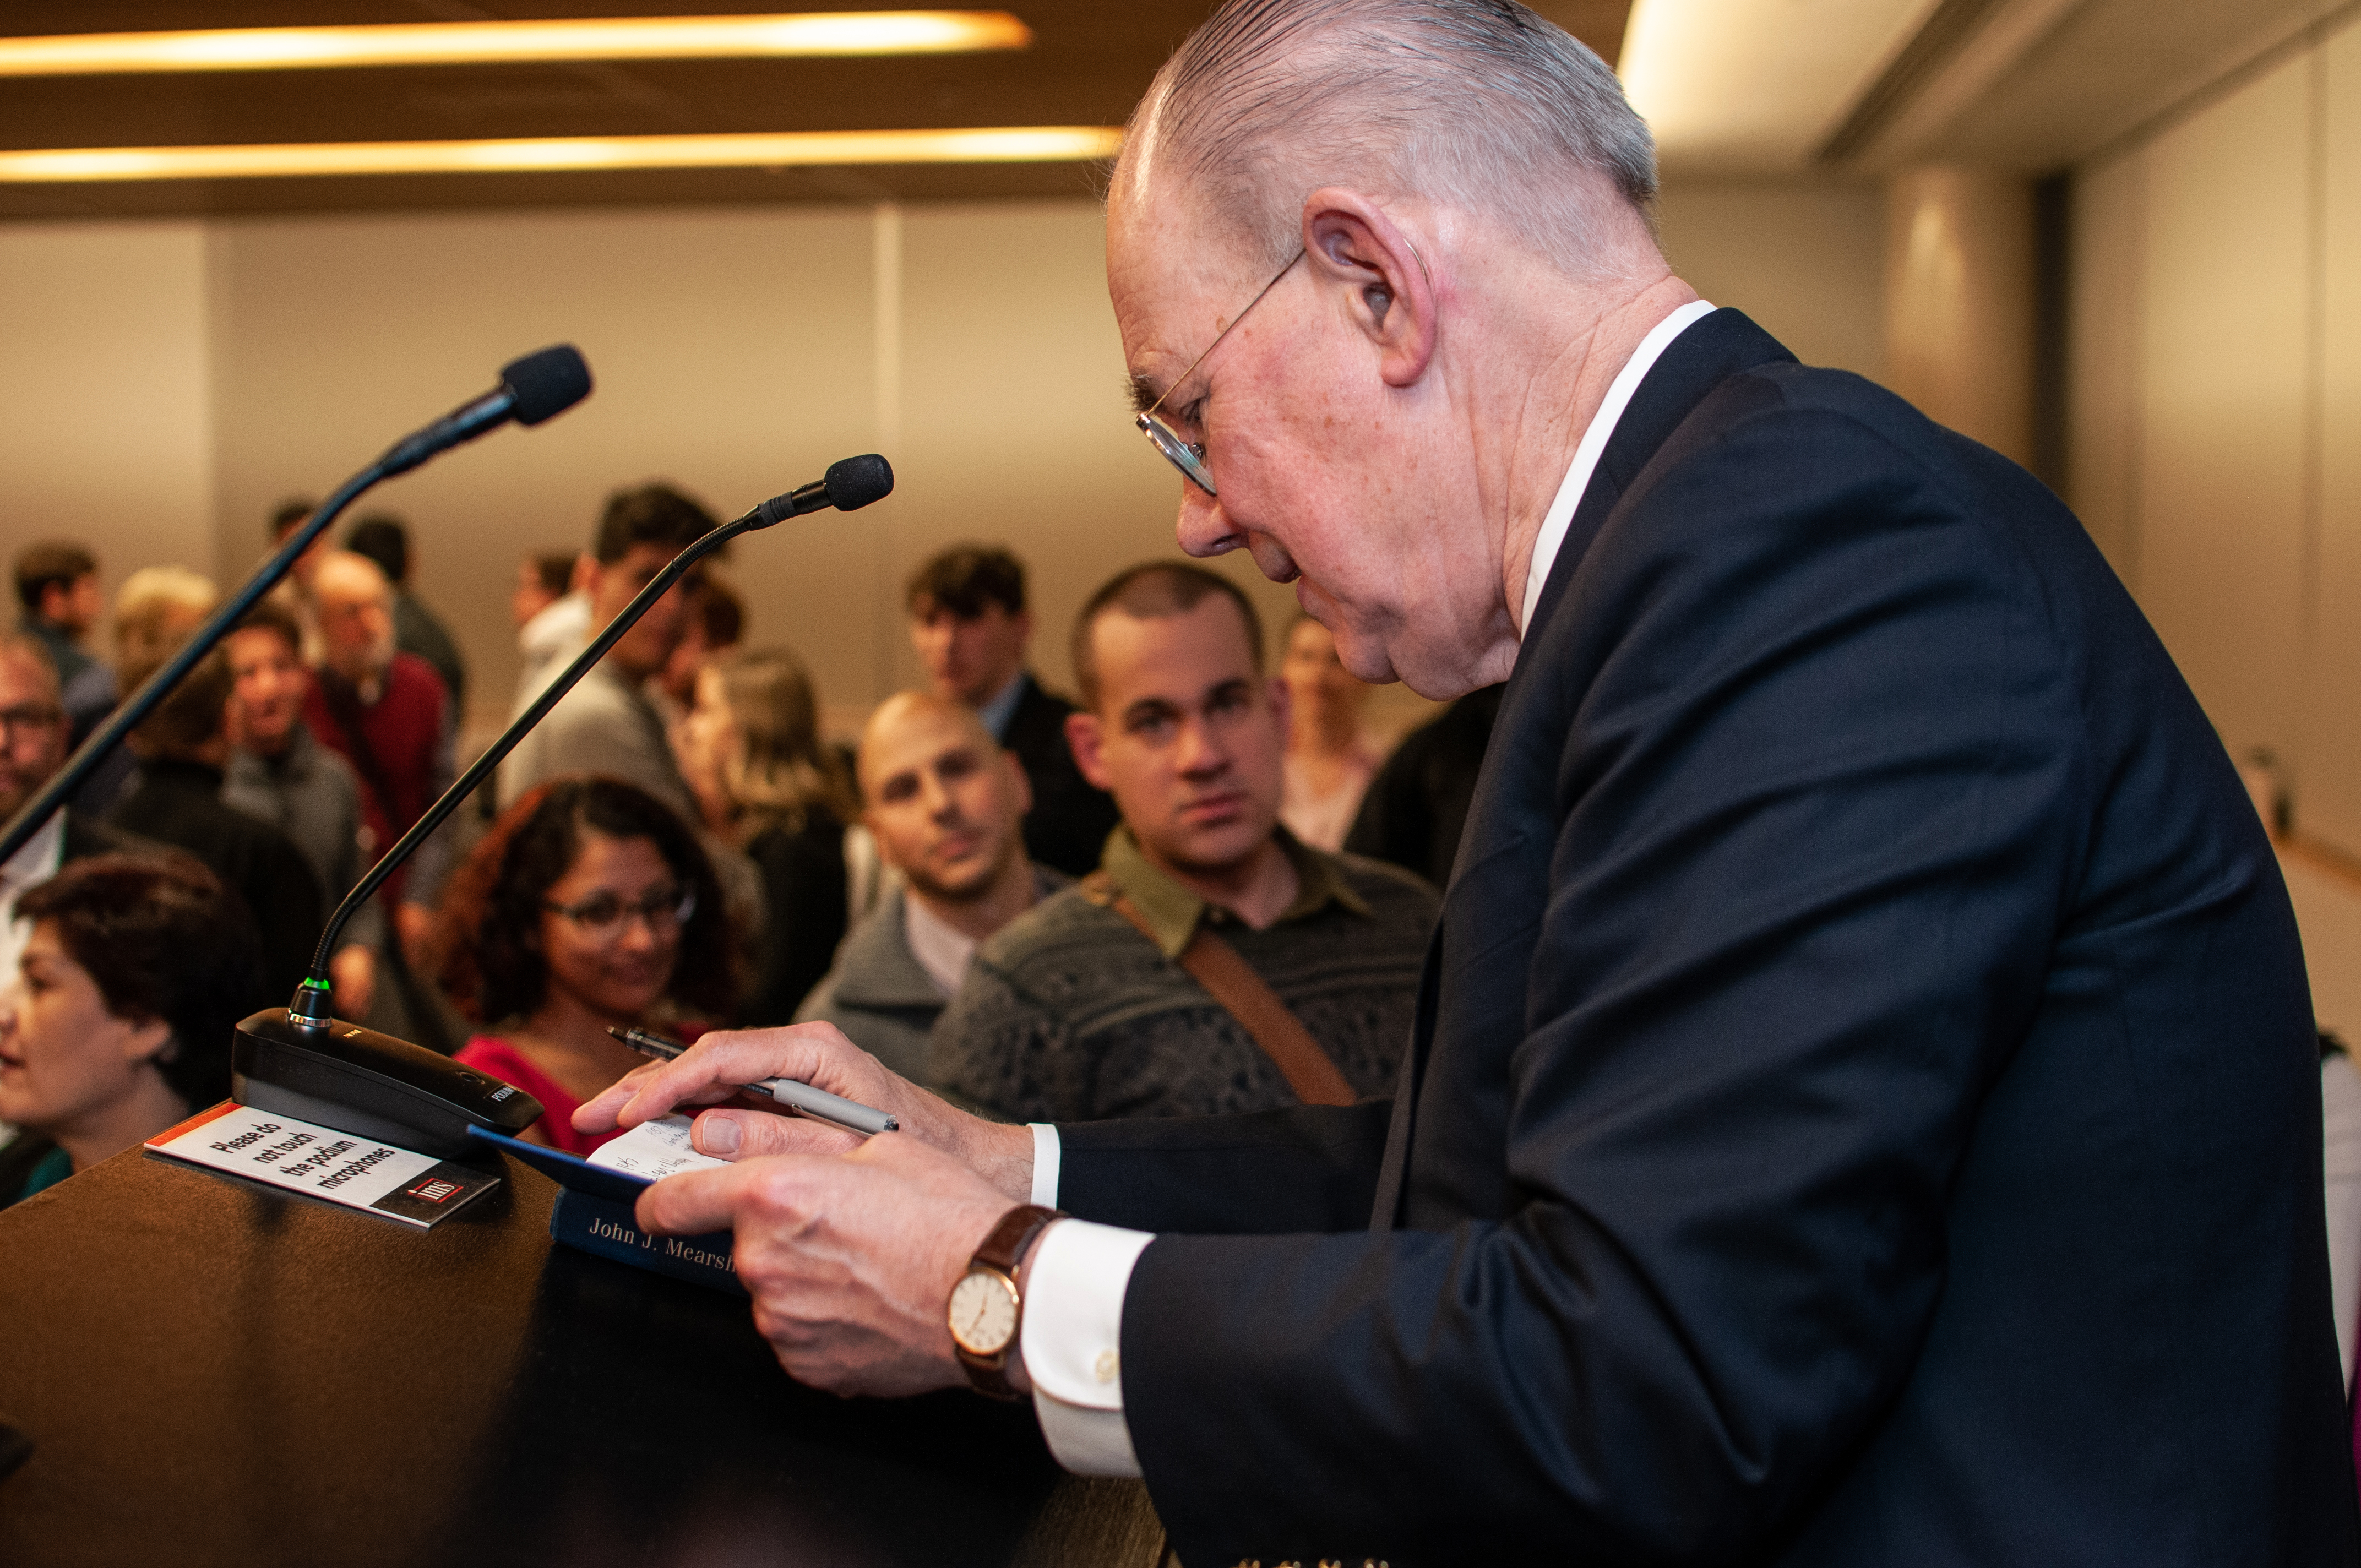 John Mearsheimer signs autographs after his lecture.